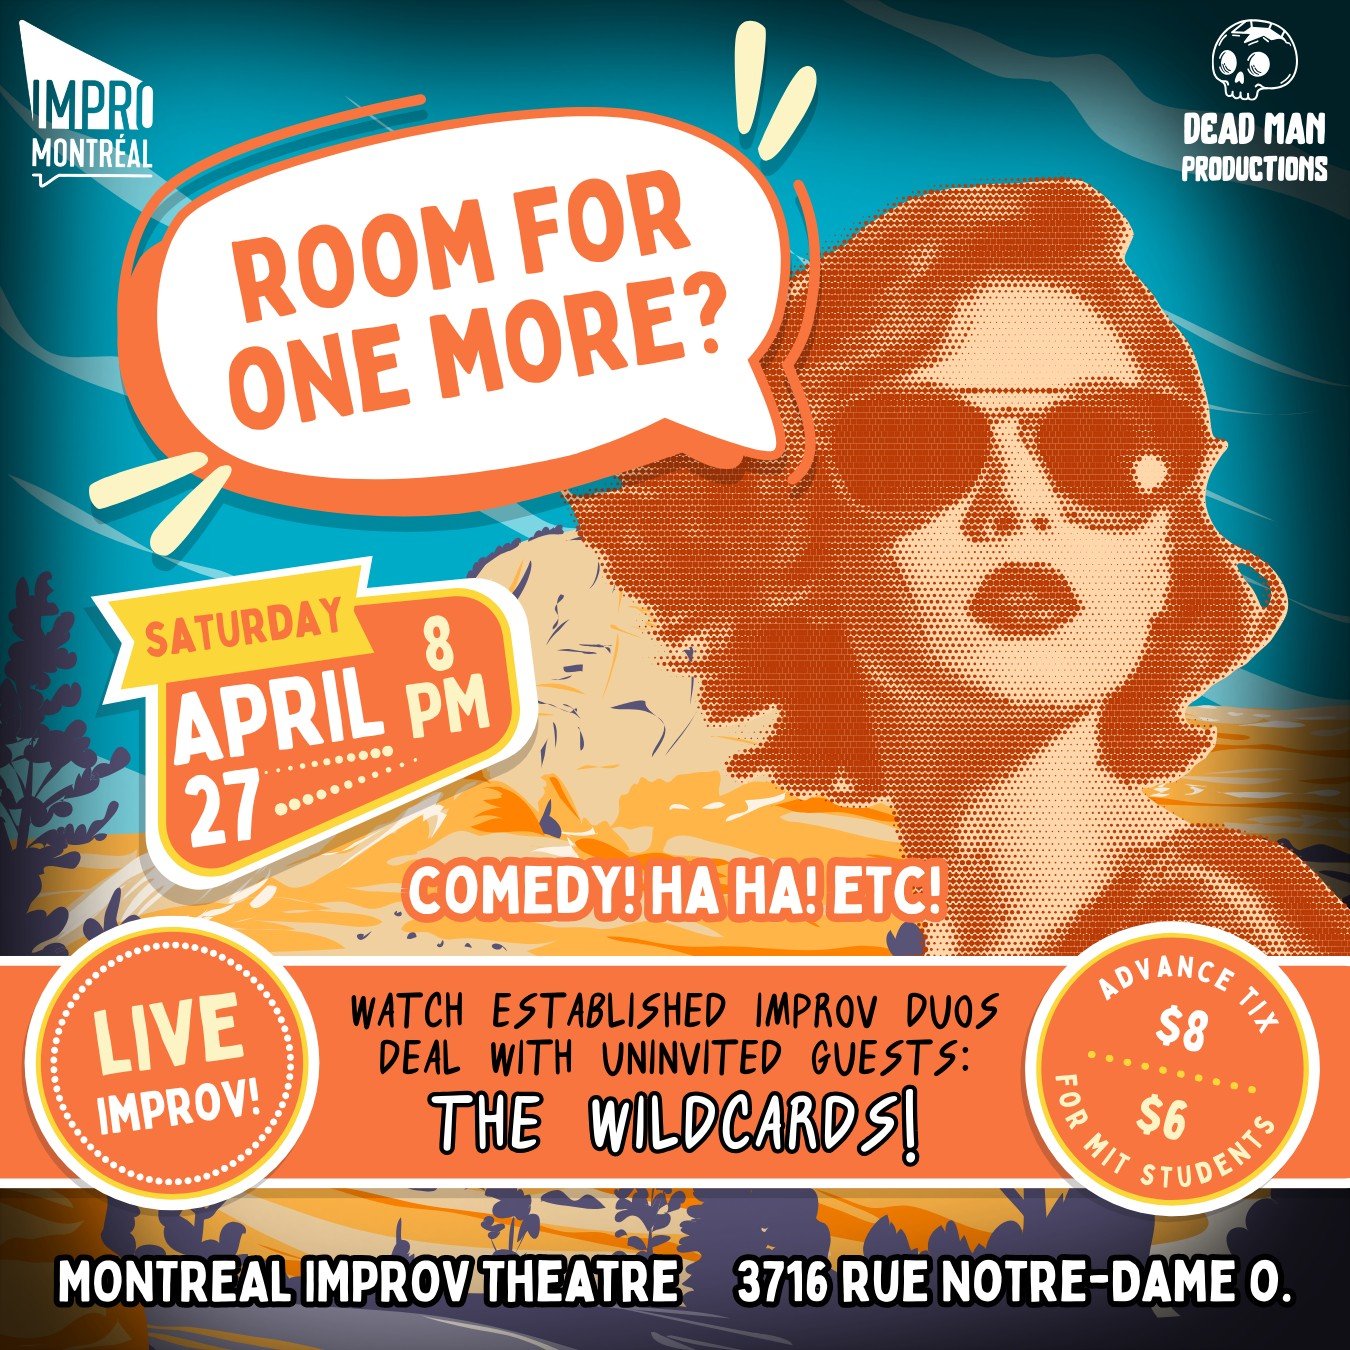 Join us Saturday, April 27th at 8pm for ROOM FOR ONE MORE?

To perform at the top of their game, improv duos work hard to foster trust, chemistry, and synergy. So what happens when all of that is disrupted?

In ROOM FOR ONE MORE, four established duo